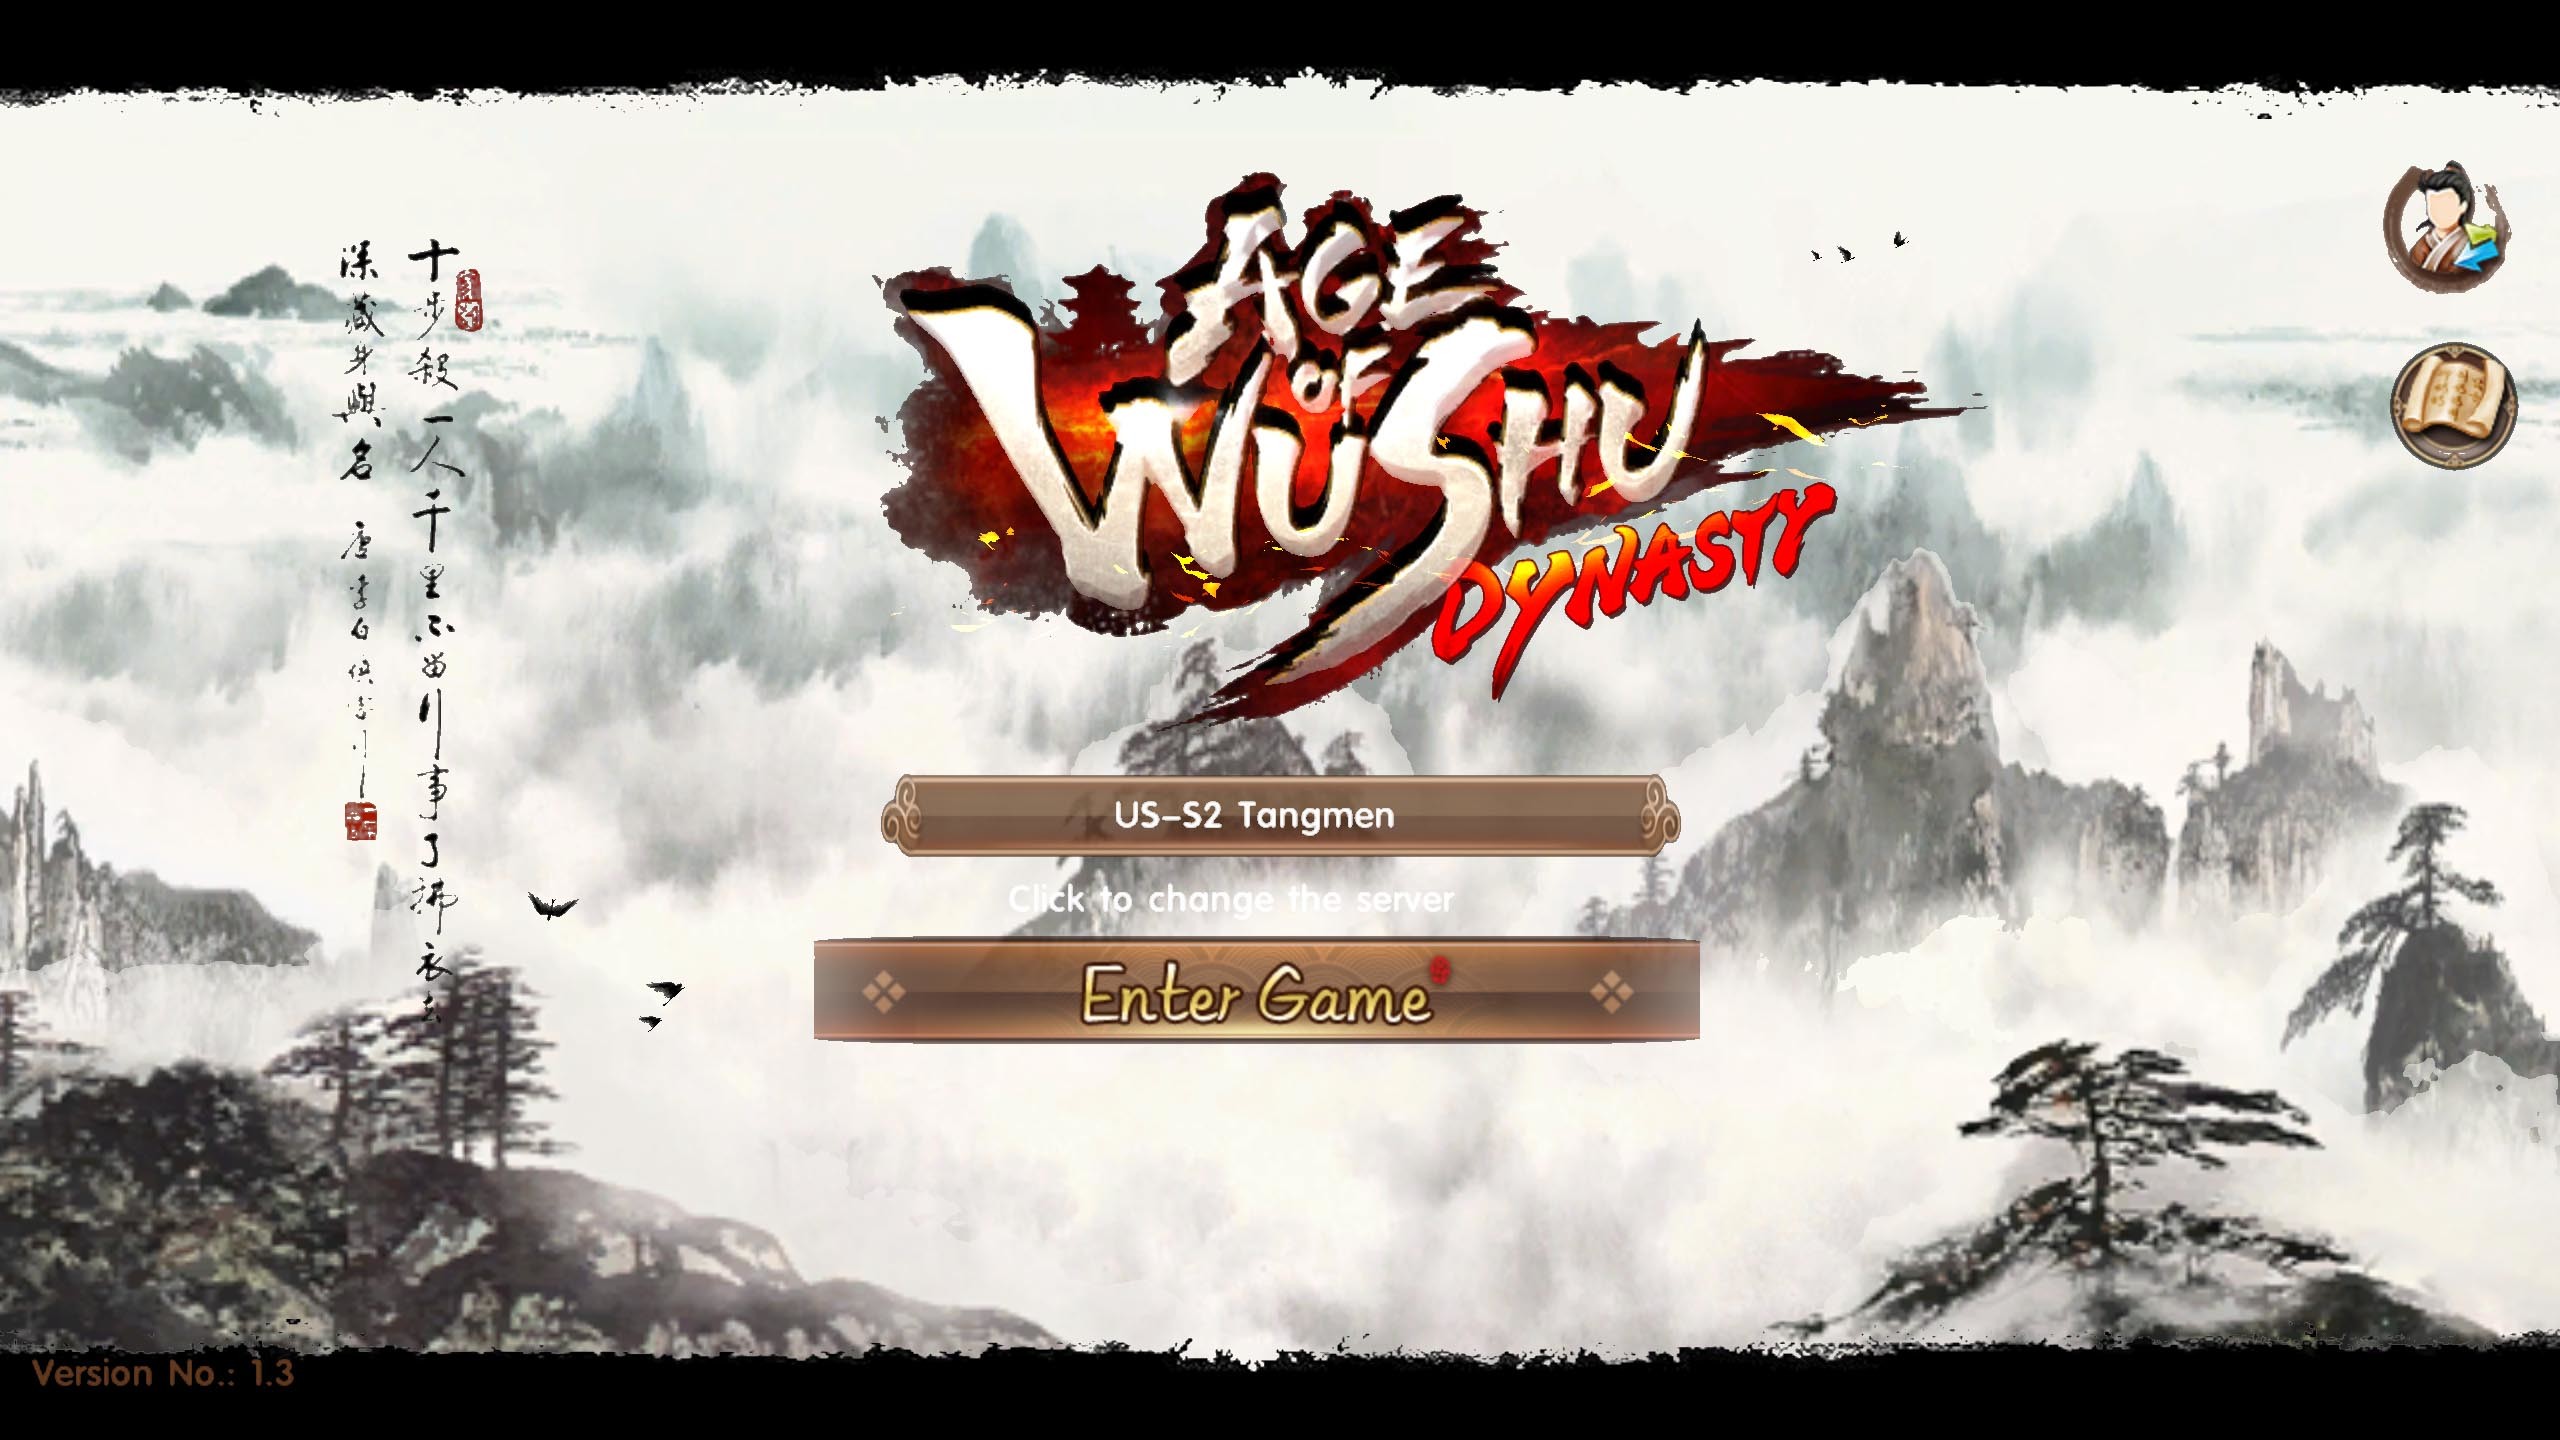 2560x1440 Search for the Perfect Mobile MMORPG: Age of Wushu Dynasty